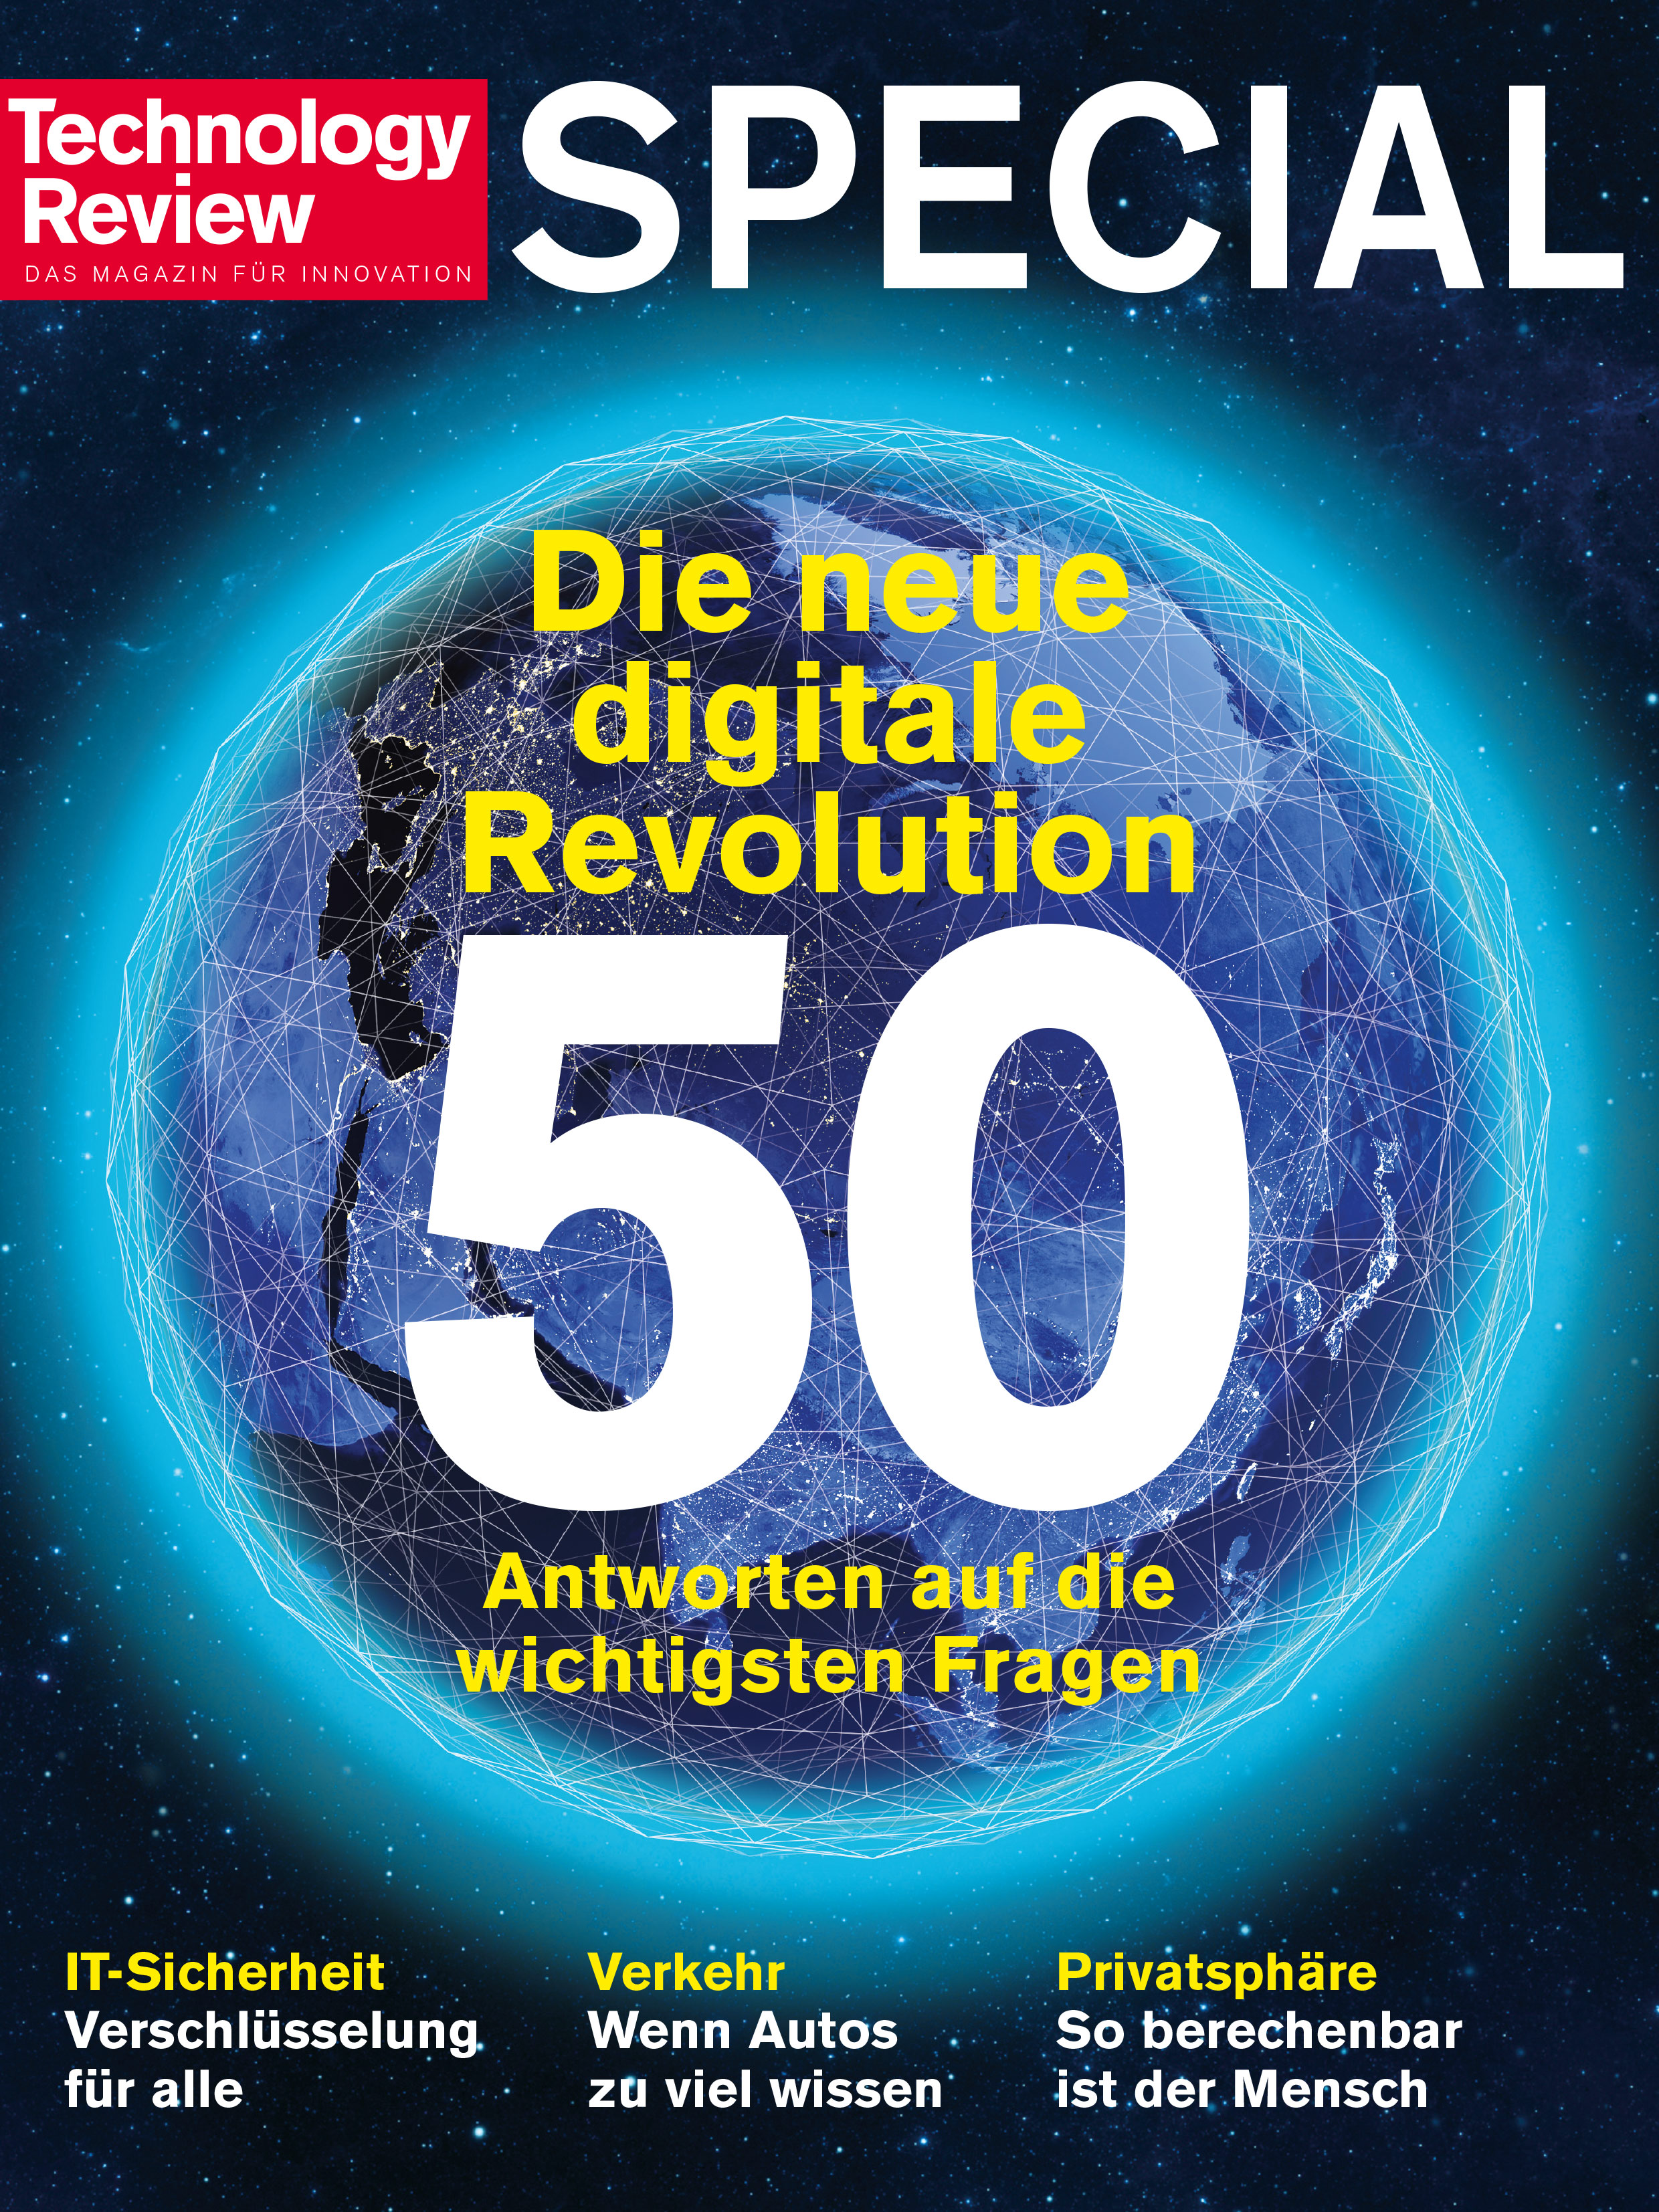 Technology Review Special Digitale Revolution 2014